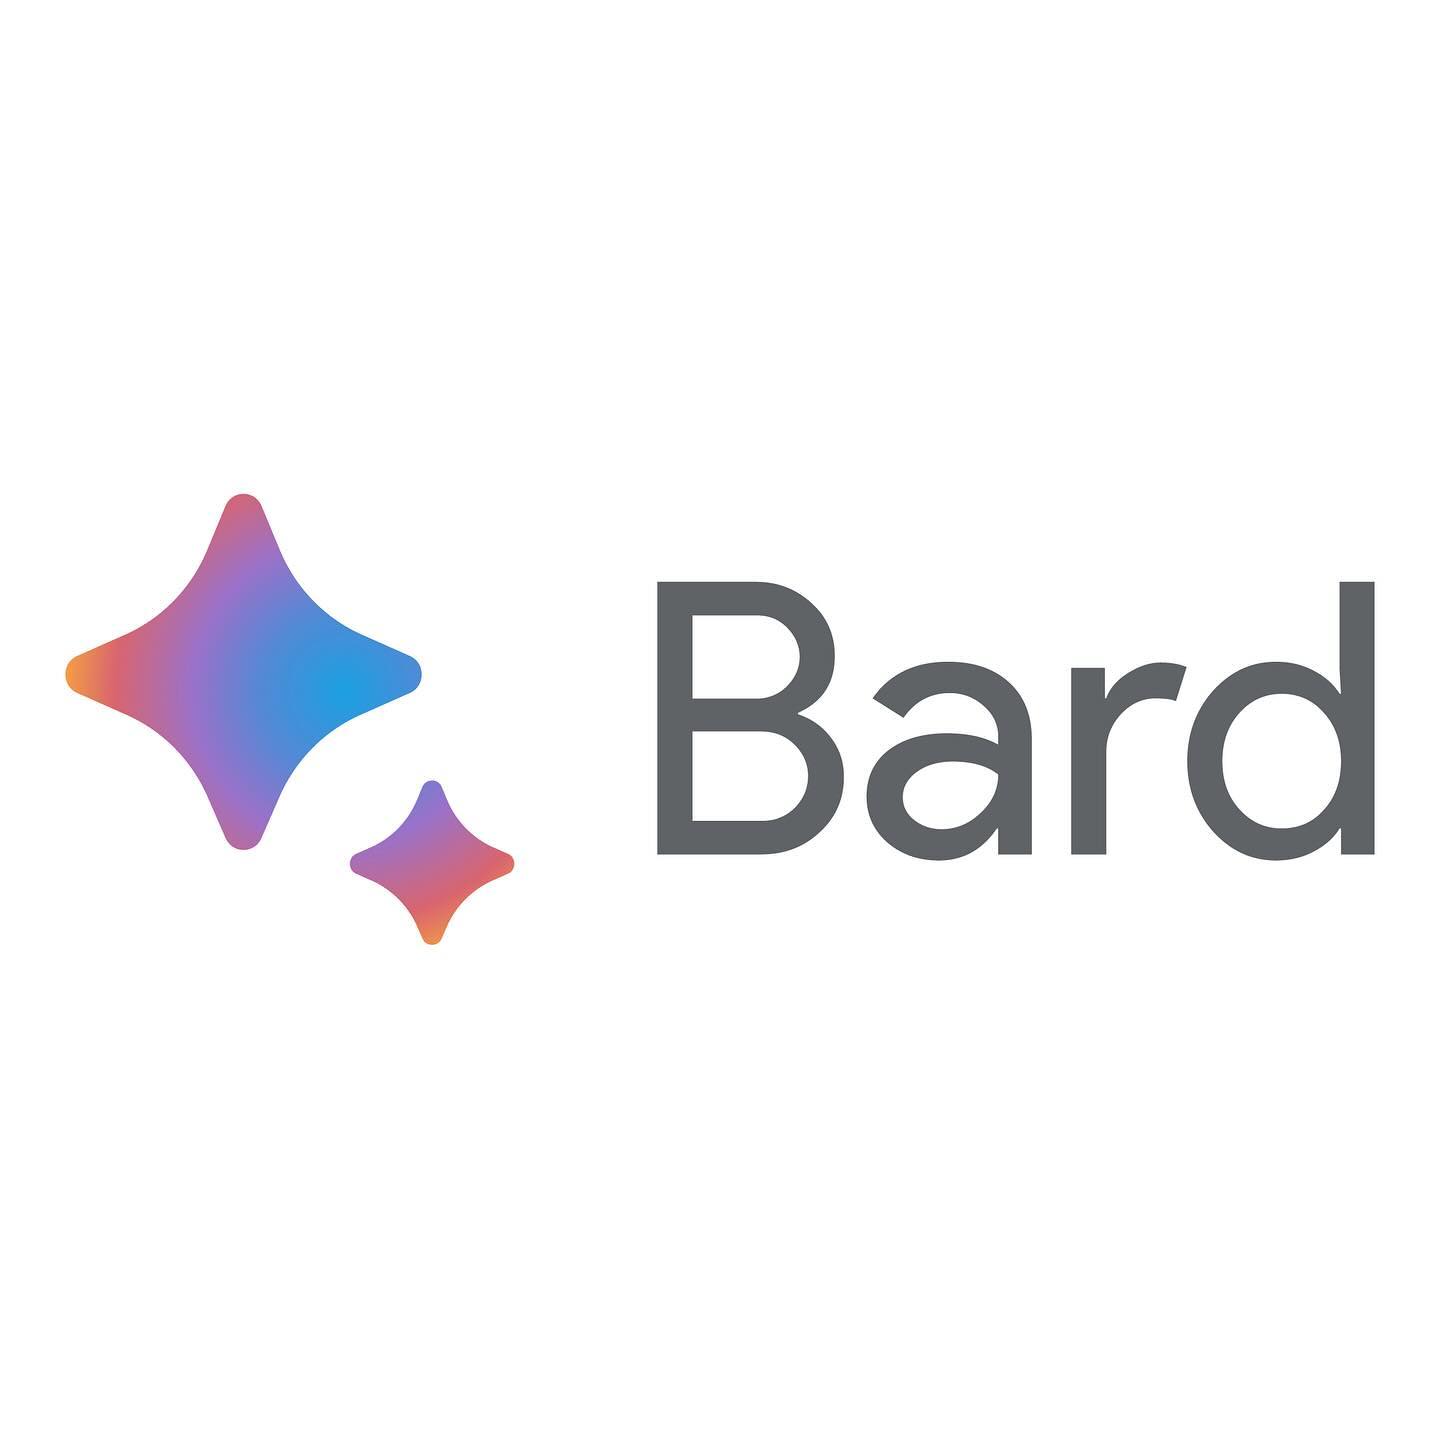 Chatbot is part of our lives now, will become more and more important. For now, do like Bard the most. #Chatbot #Bard #ChatGPT #Copilot